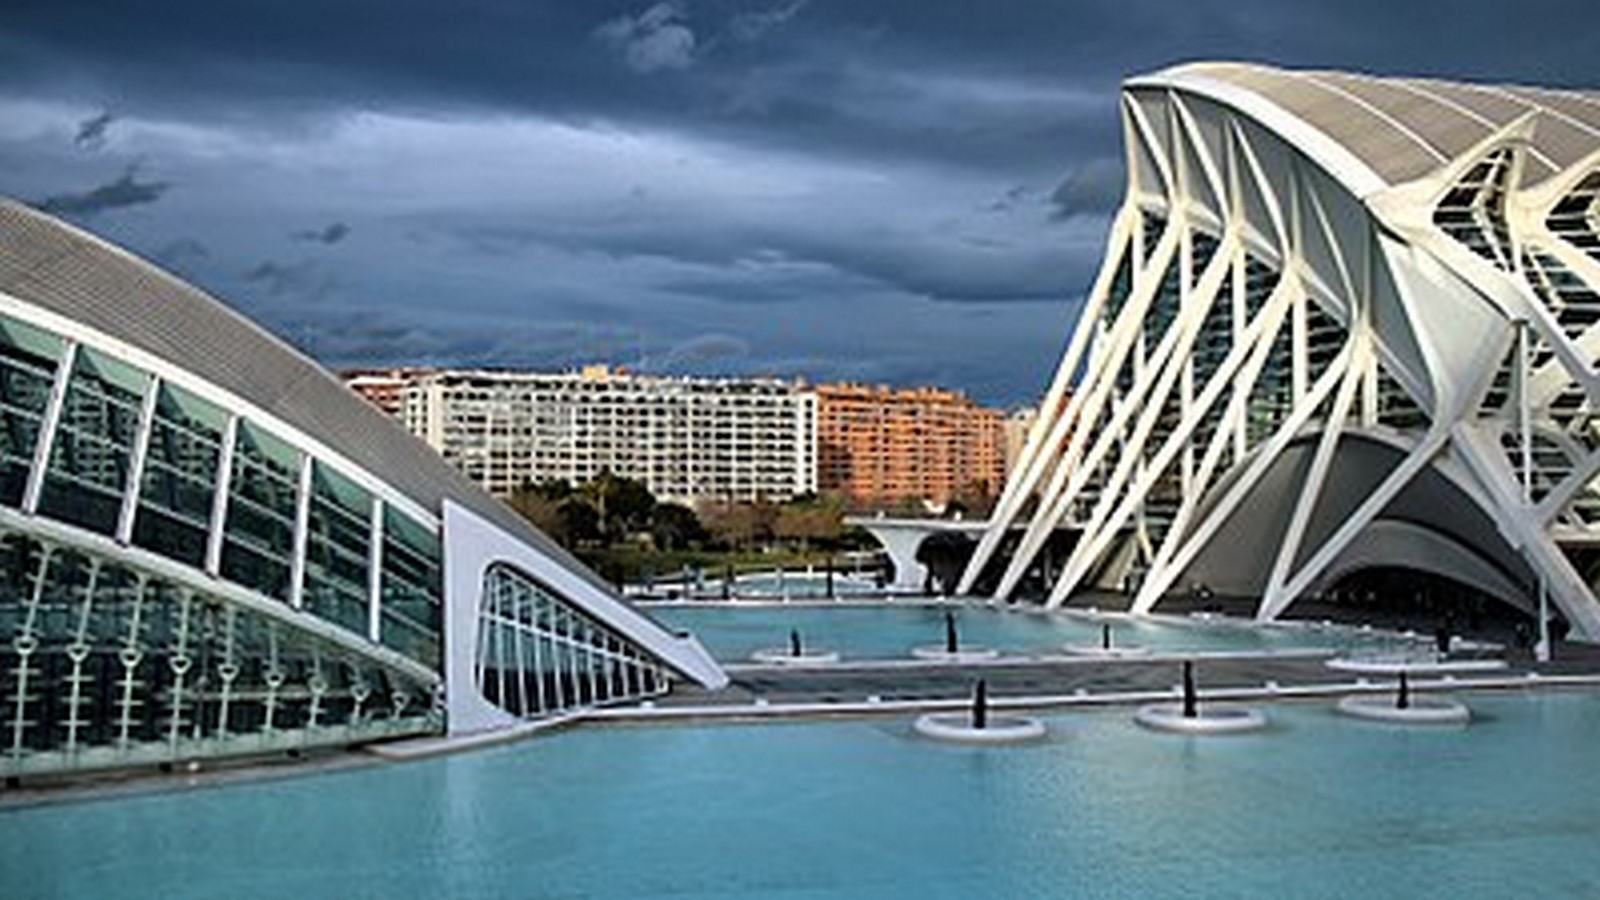 The City of Arts and Sciences, Spain, by Santiago Calatrava: Modern scientific and cultural complex - Sheet1